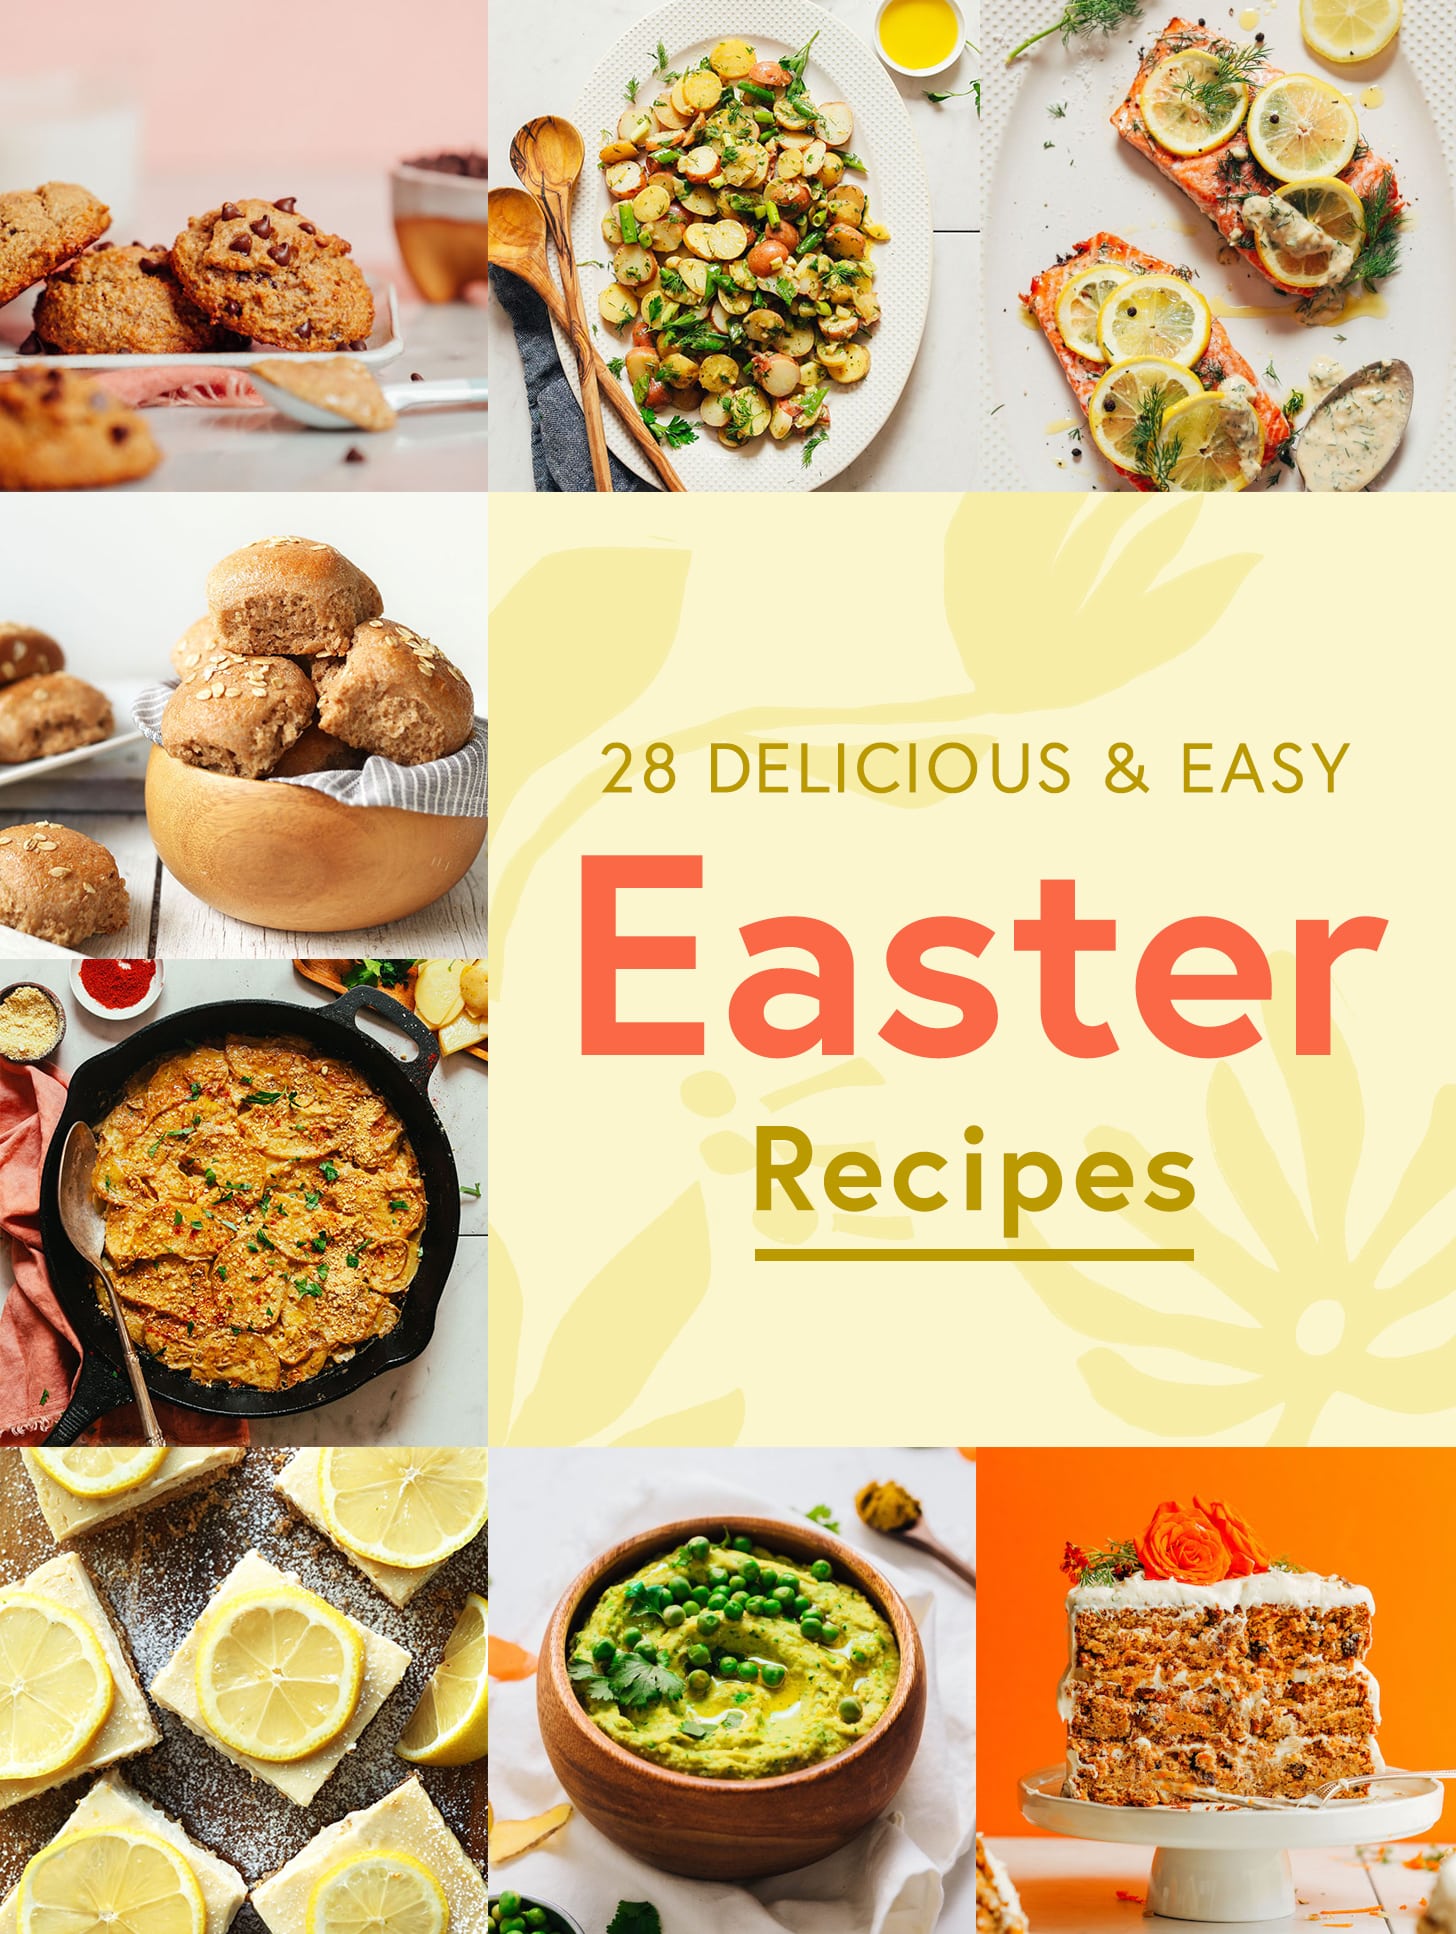 Easy and Delicious Easter Recipes